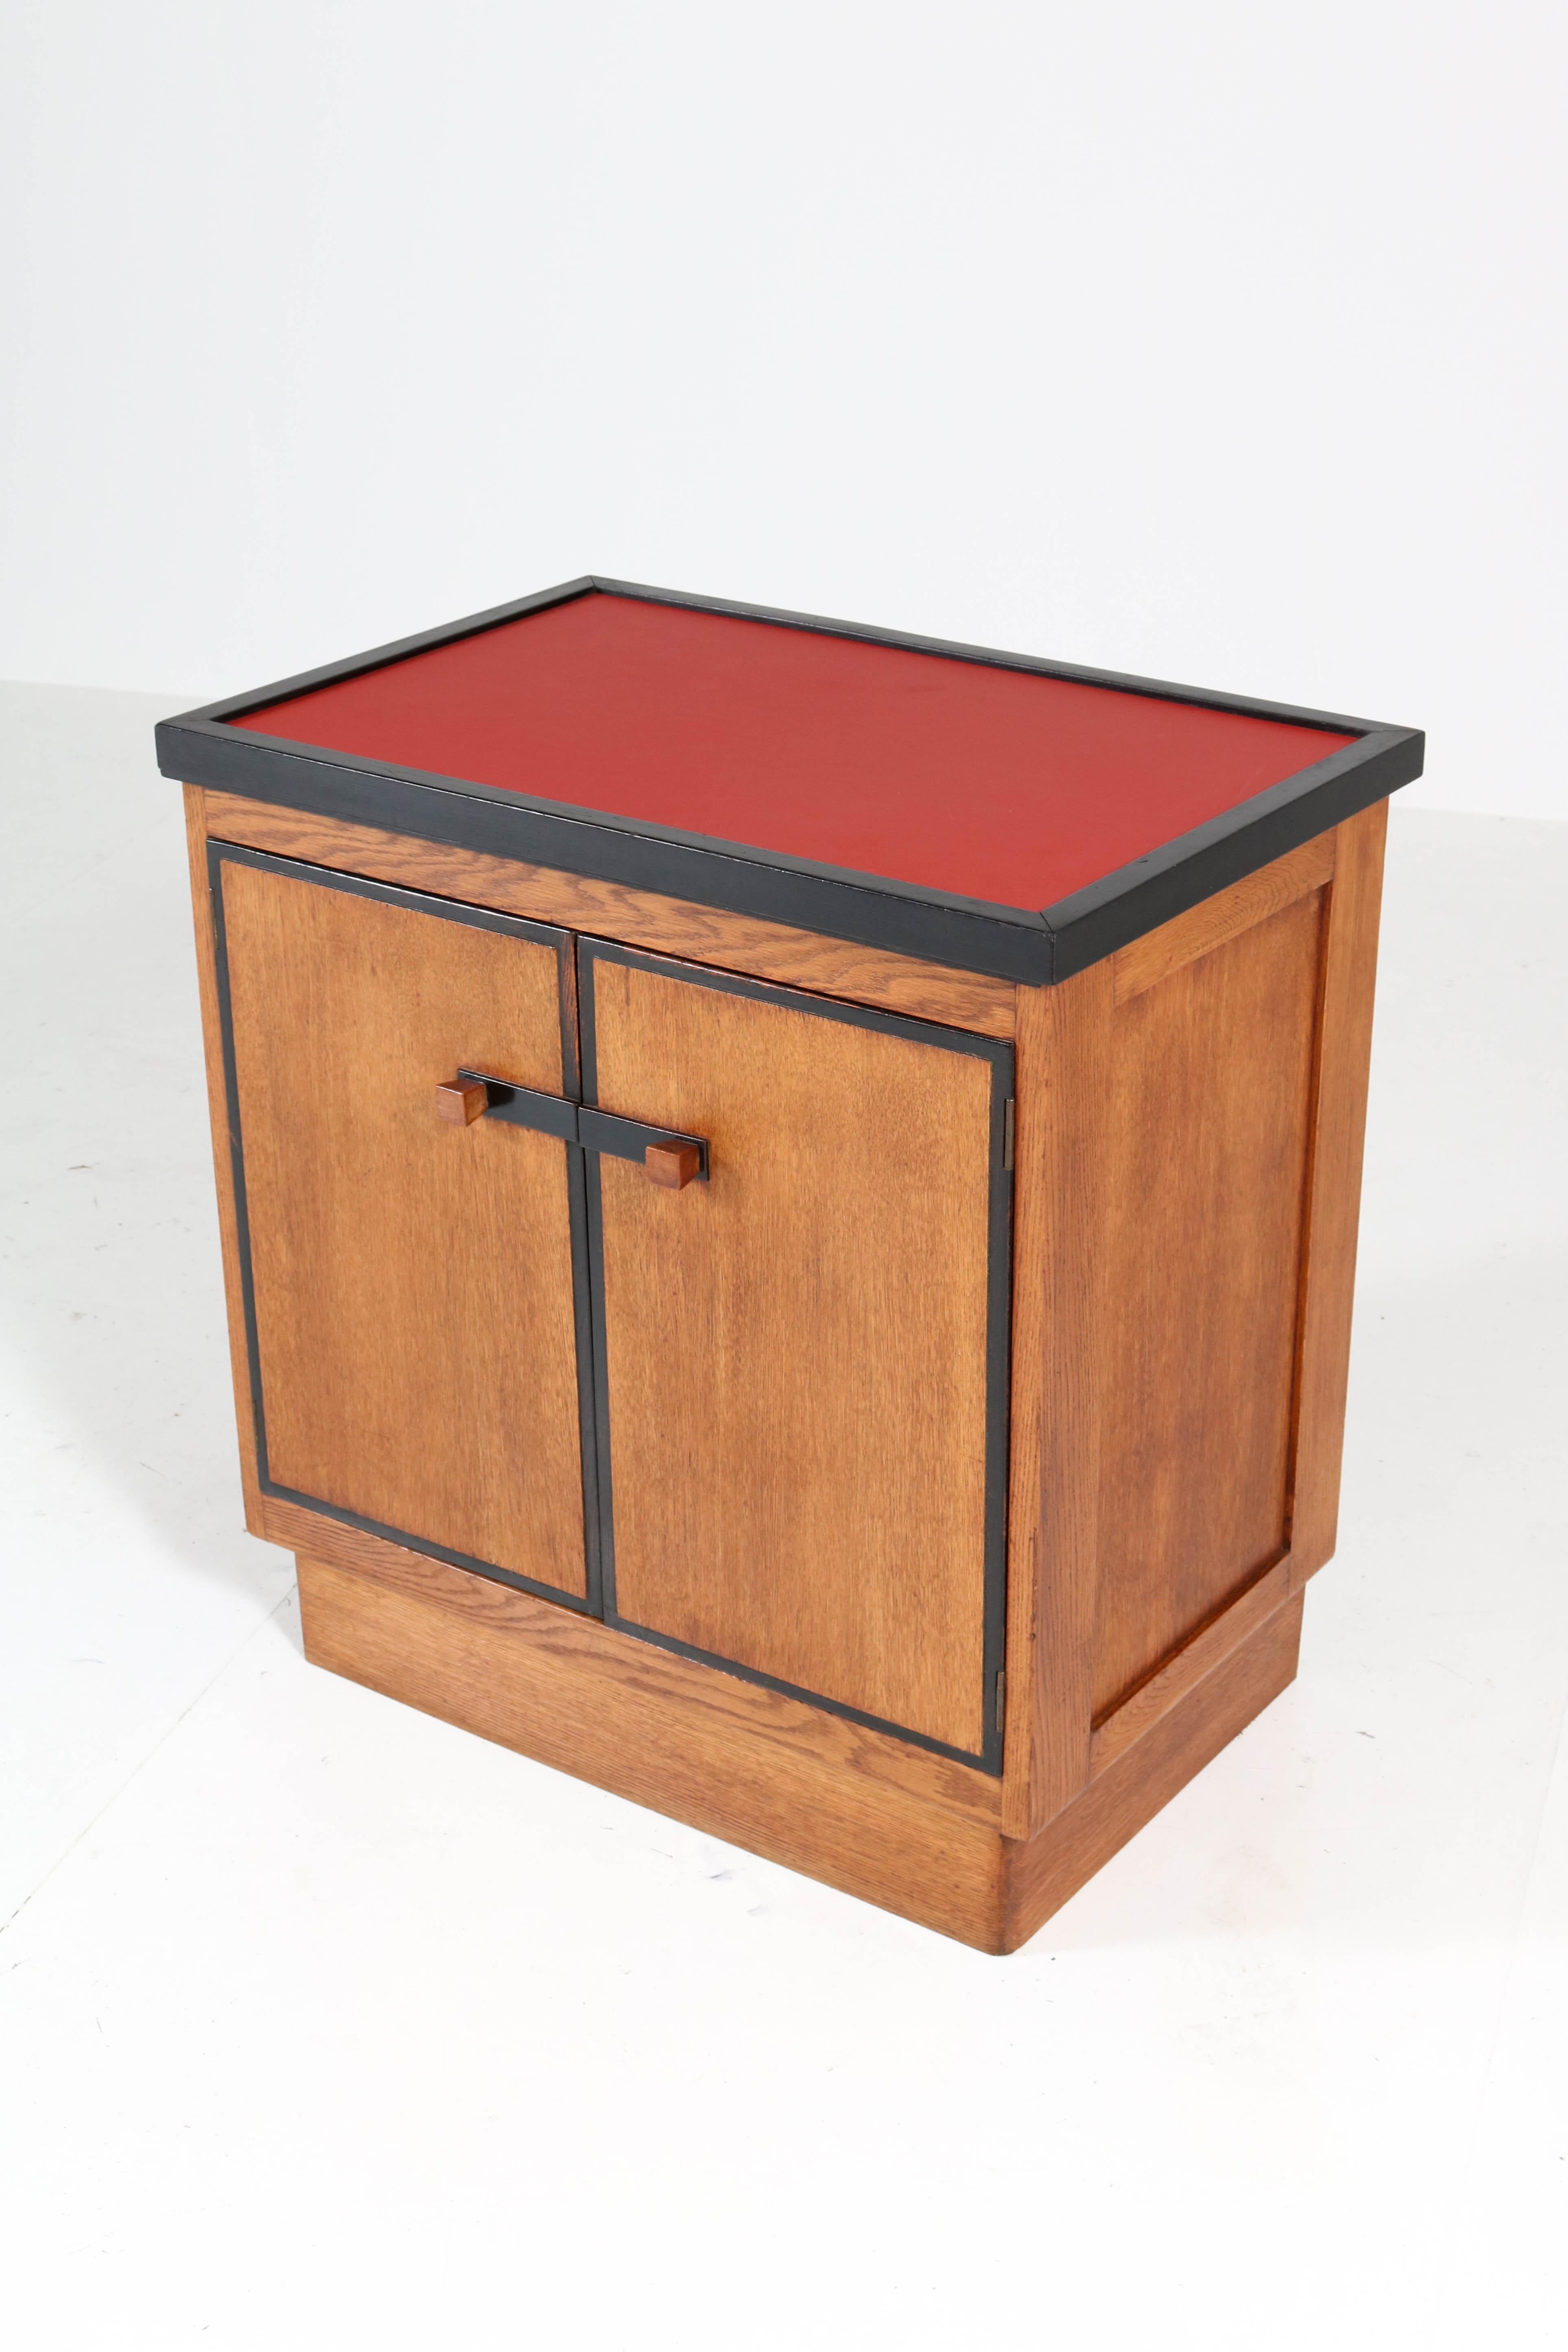 Magnificent and rare Art Deco Haagse School tea cabinet.
Design by Jan Brunott.
Striking Dutch design from the twenties.
Solid oak and oak veneer with original ebonized lining.
The top of the tray is renewed with red linoleum.
Marked with